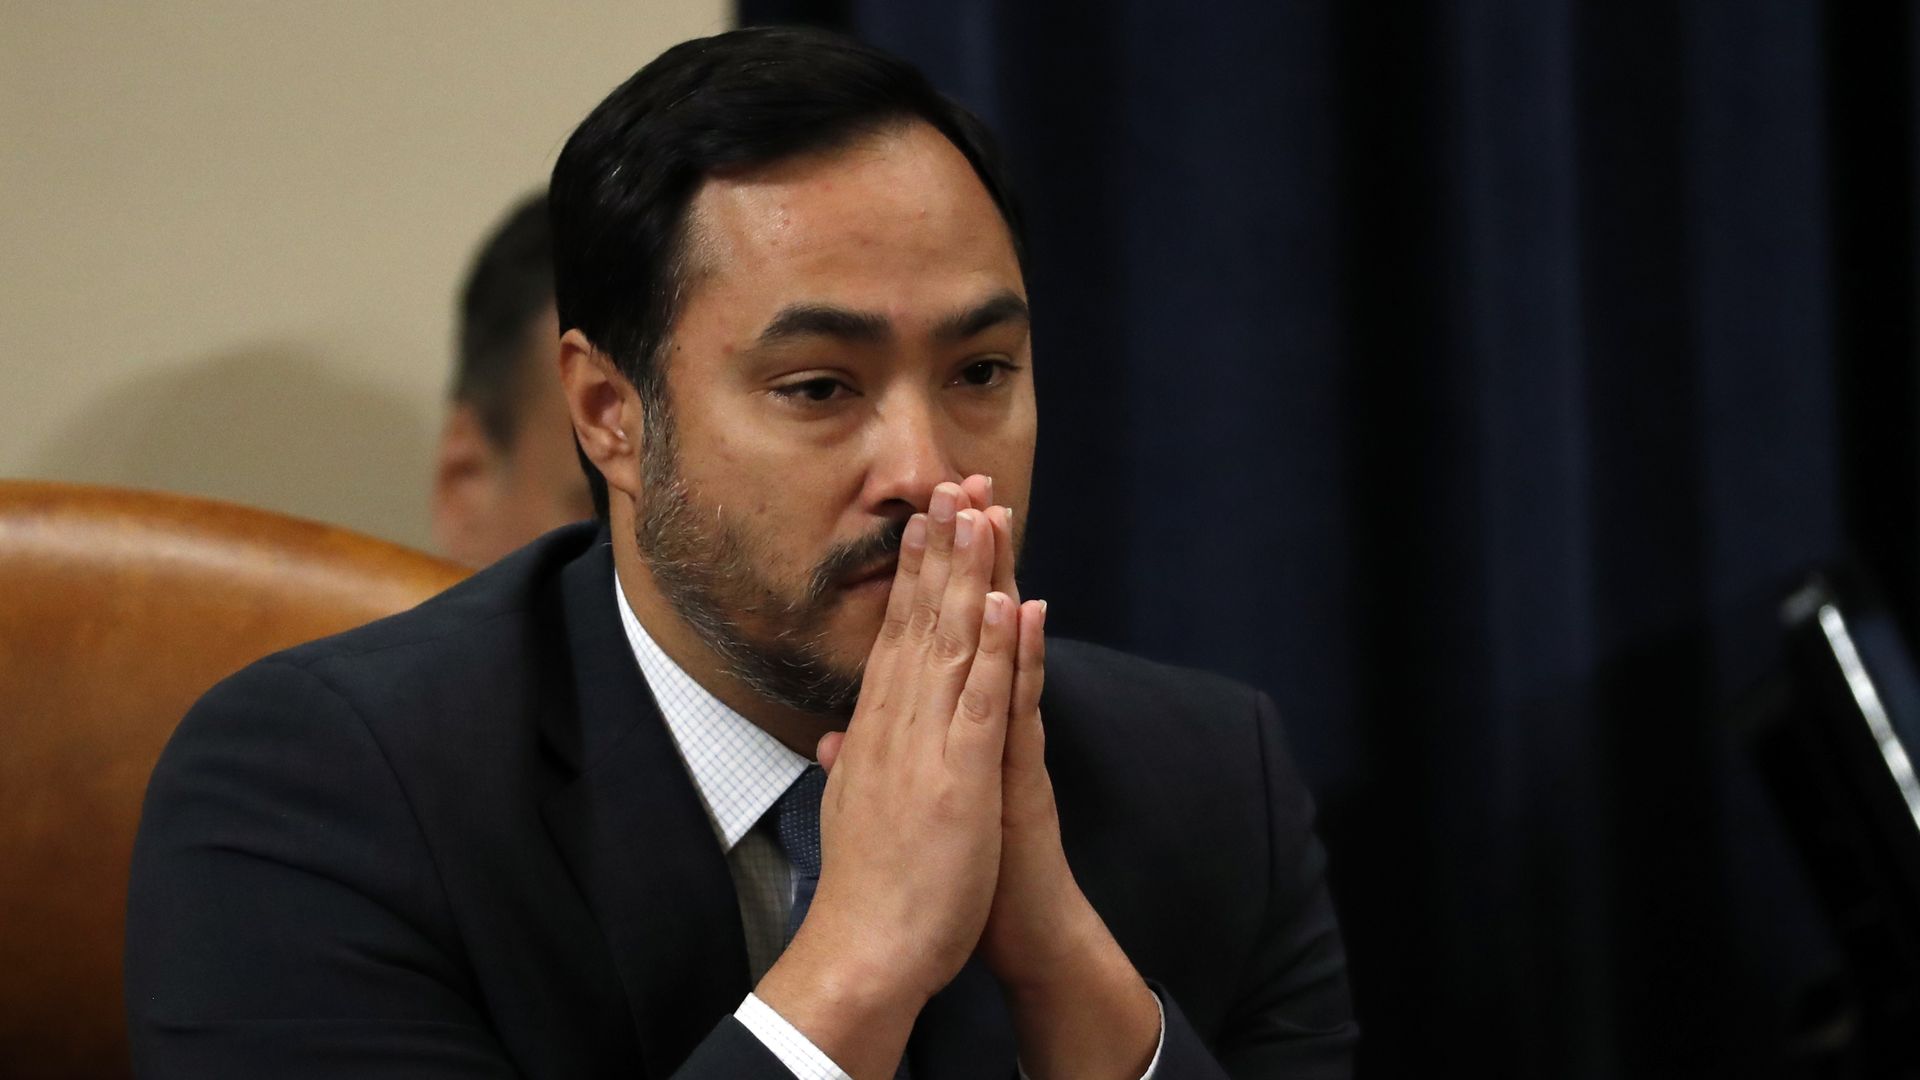 US Rep. Joaquin Castro listens during a House Intelligence Committee impeachment inquiry hearing.